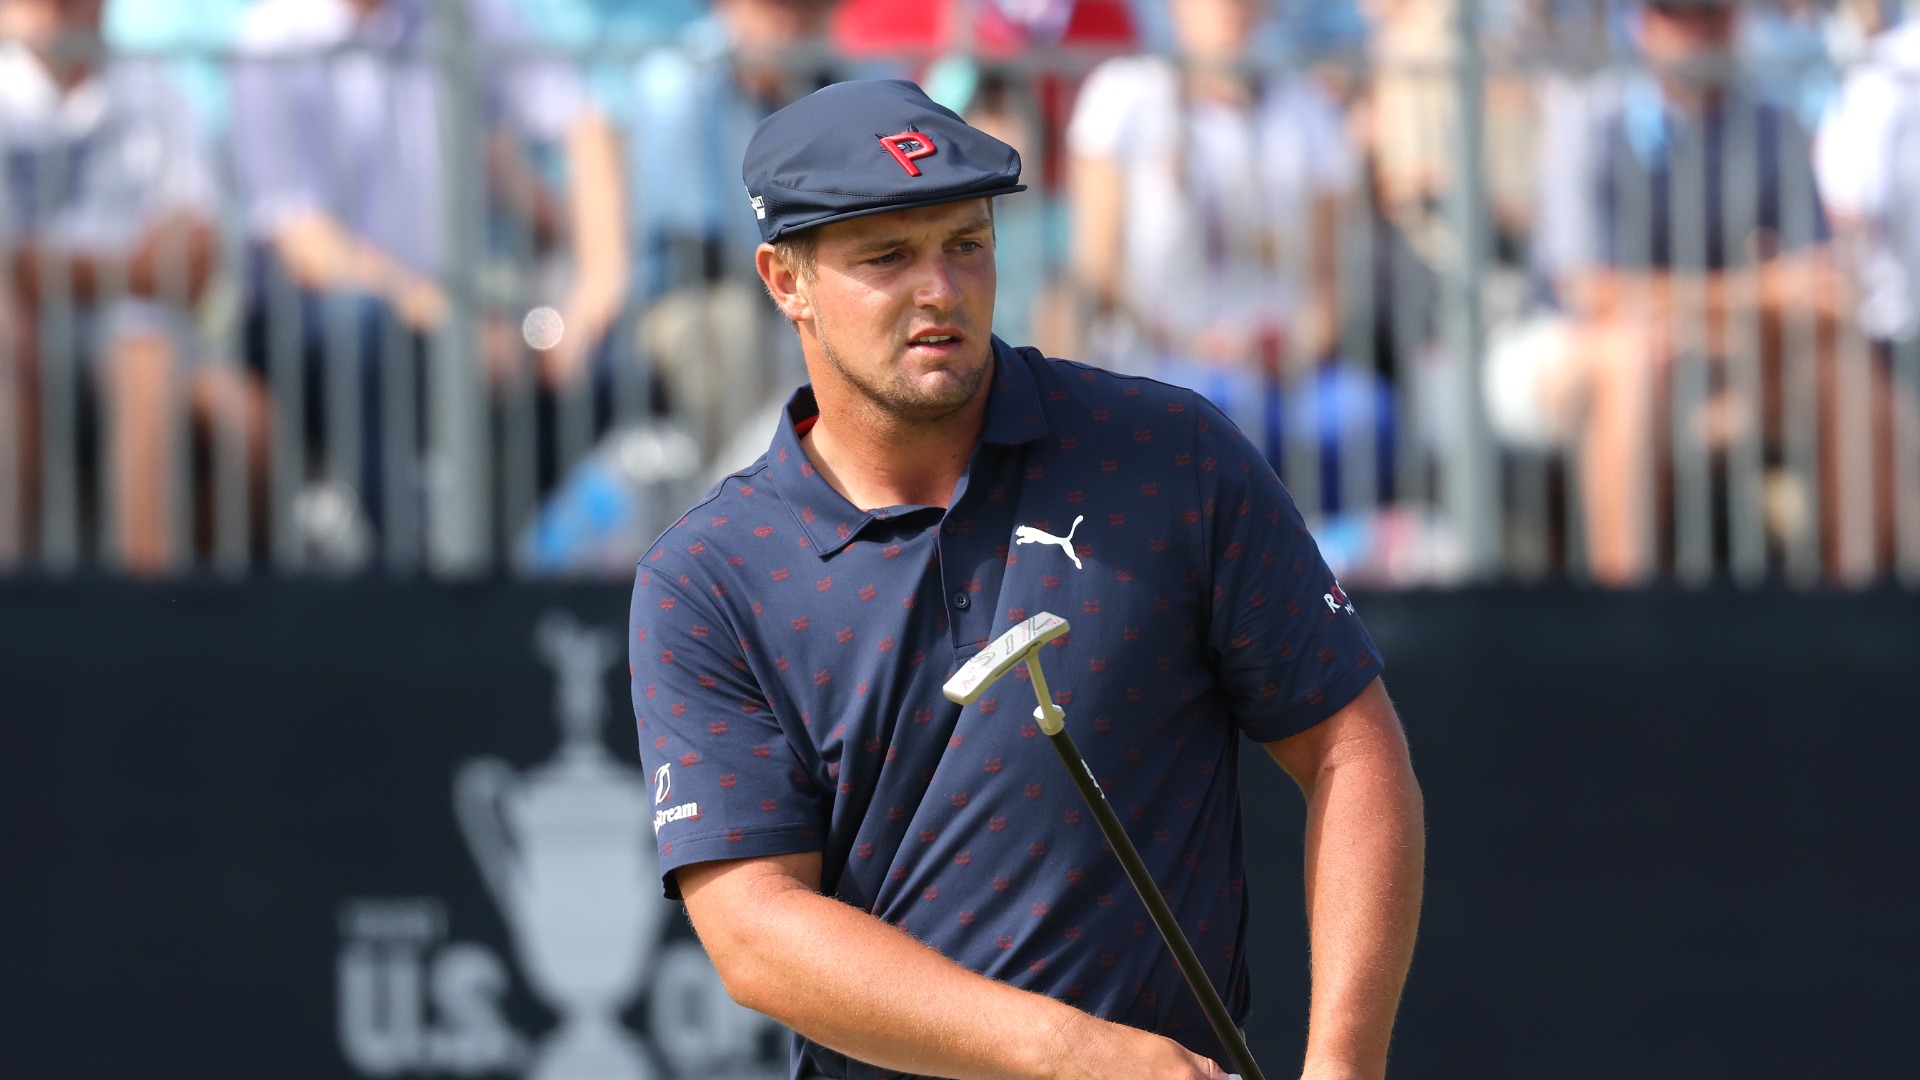 Patrick Reed is headed to Tokyo to represent Team USA after Bryson DeChambeau tested positive for COVID-19.